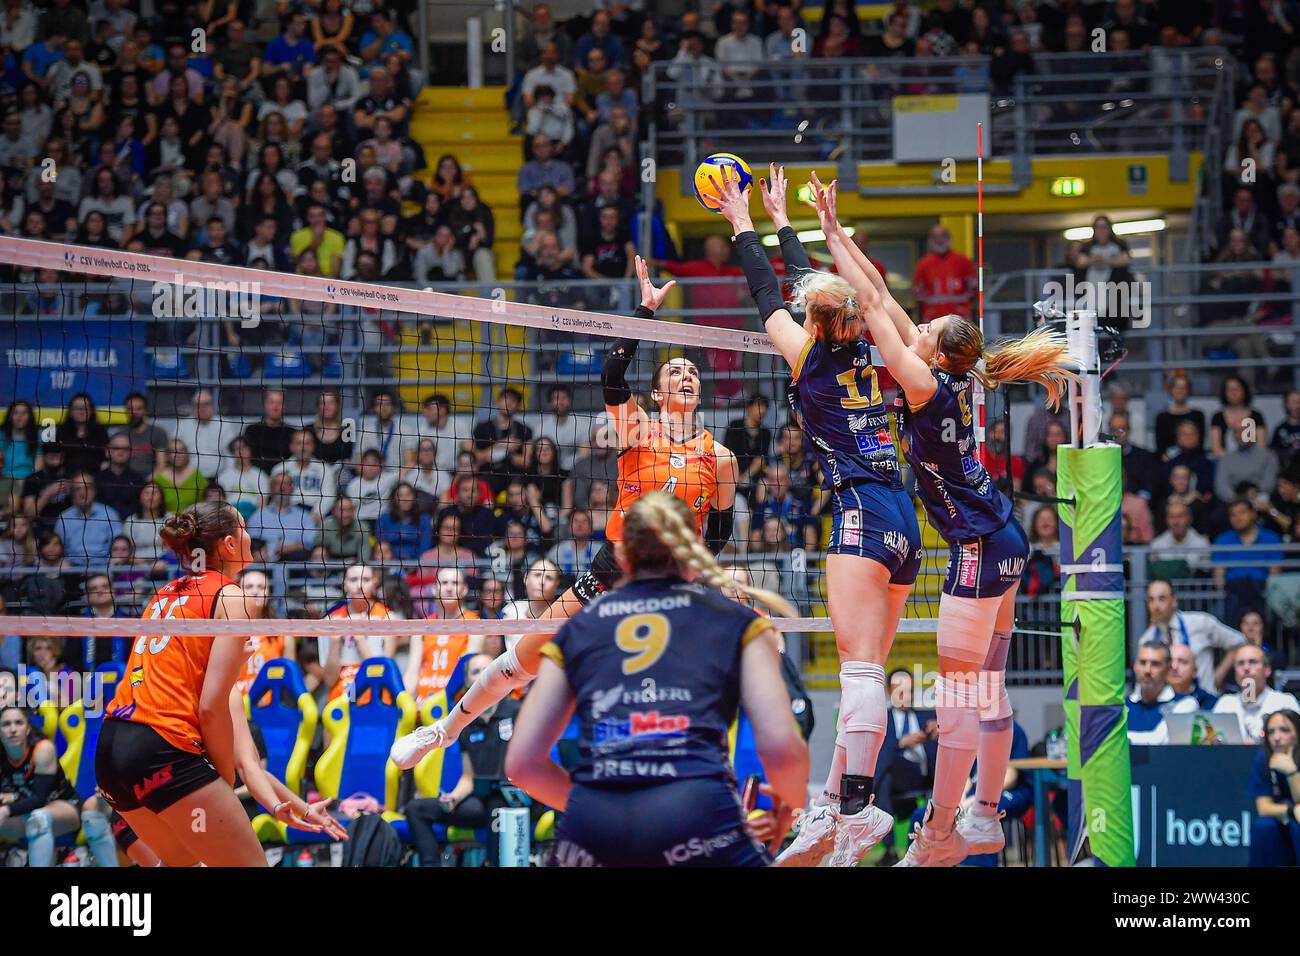 Turin, Italy. 10th Jan, 2024. Final CEV Volleyball Cup 2024 Women Reale Mutua Fenera Chieri '76 (ITA) - Viteos Neuchatel UC (SUI) 3-1 Pala Gianni Asti Turin Haymes Madeline 4 (Viteos Neuchatel) in action during Final CEV Champions League match between Reale Mutua Fenera Chieri '76 and Viteos Neuchatel UC at Pala Gianni Asti in Turin, Italy 20 March 2024 (Photo by Tonello Abozzi/Pacific Press) Credit: Pacific Press Media Production Corp./Alamy Live News Stock Photo